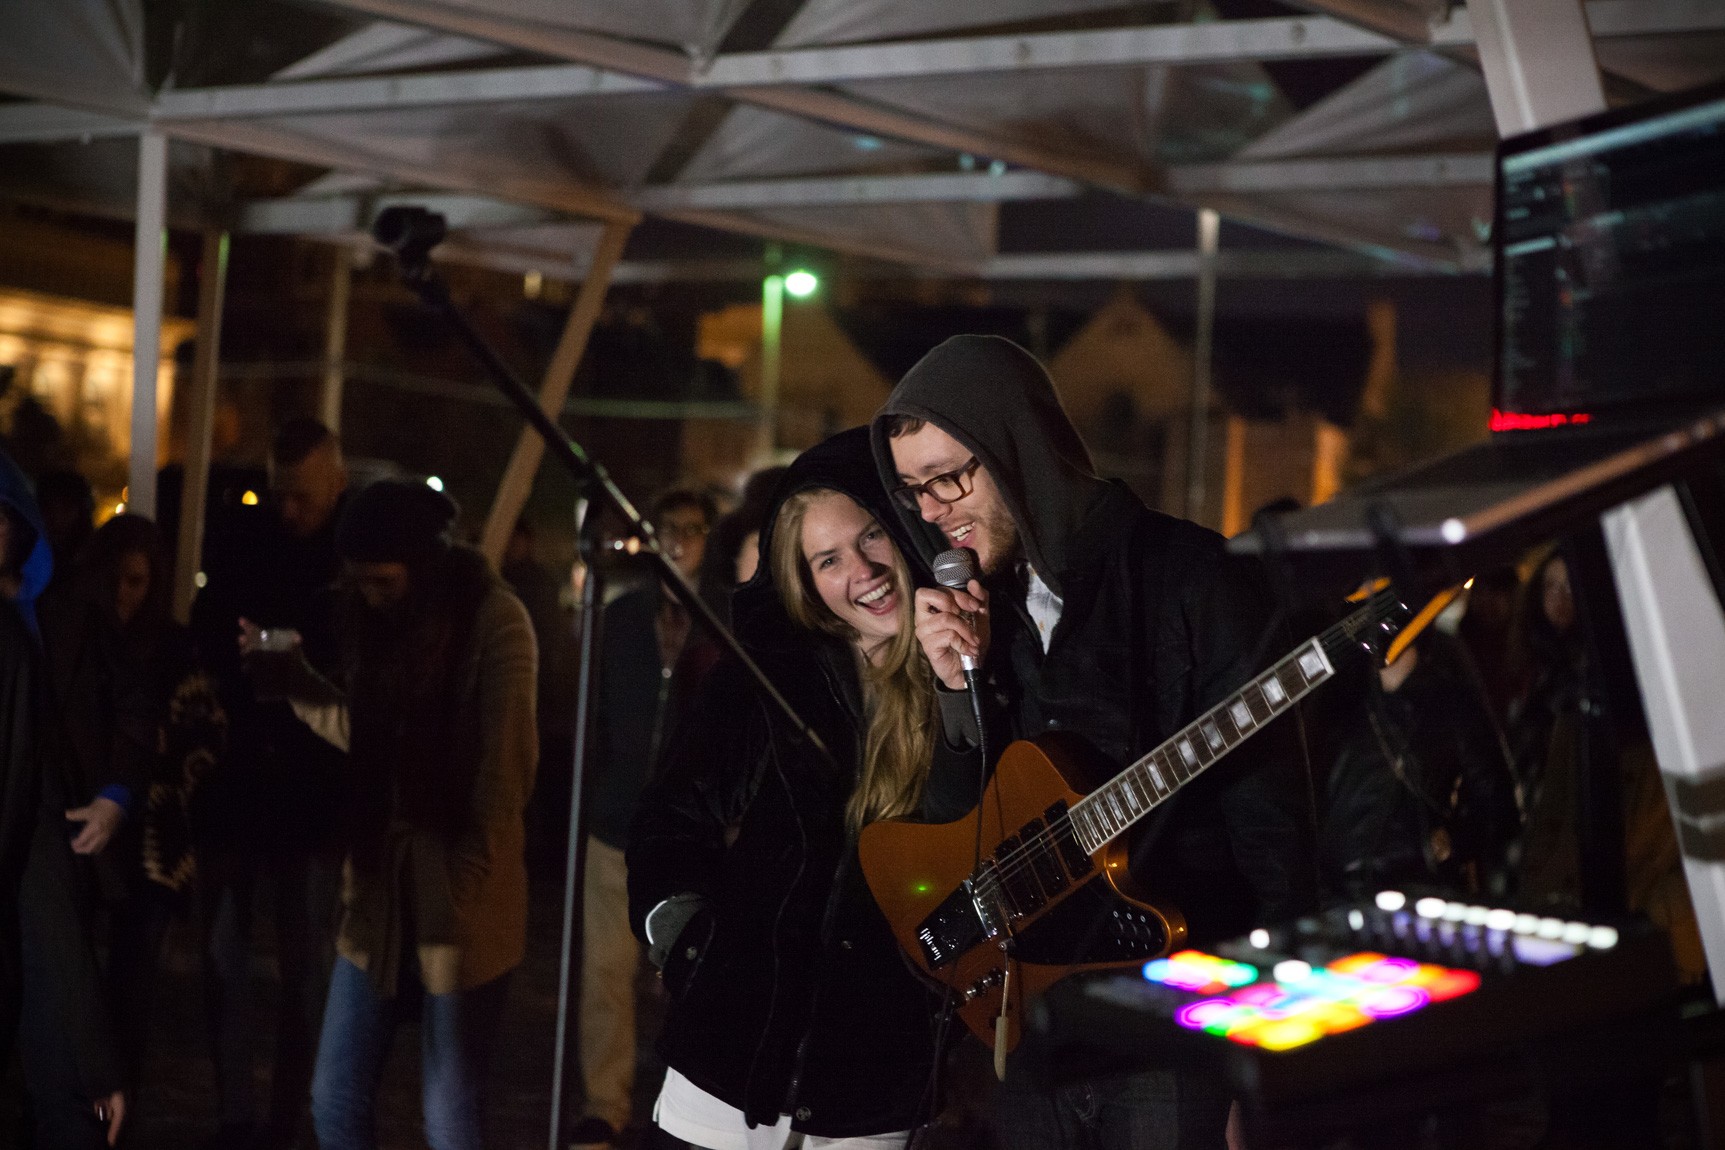 A friend smiles with Adult Fur, who speaks into a microphone and wears a hoodie and a guitar around his body.